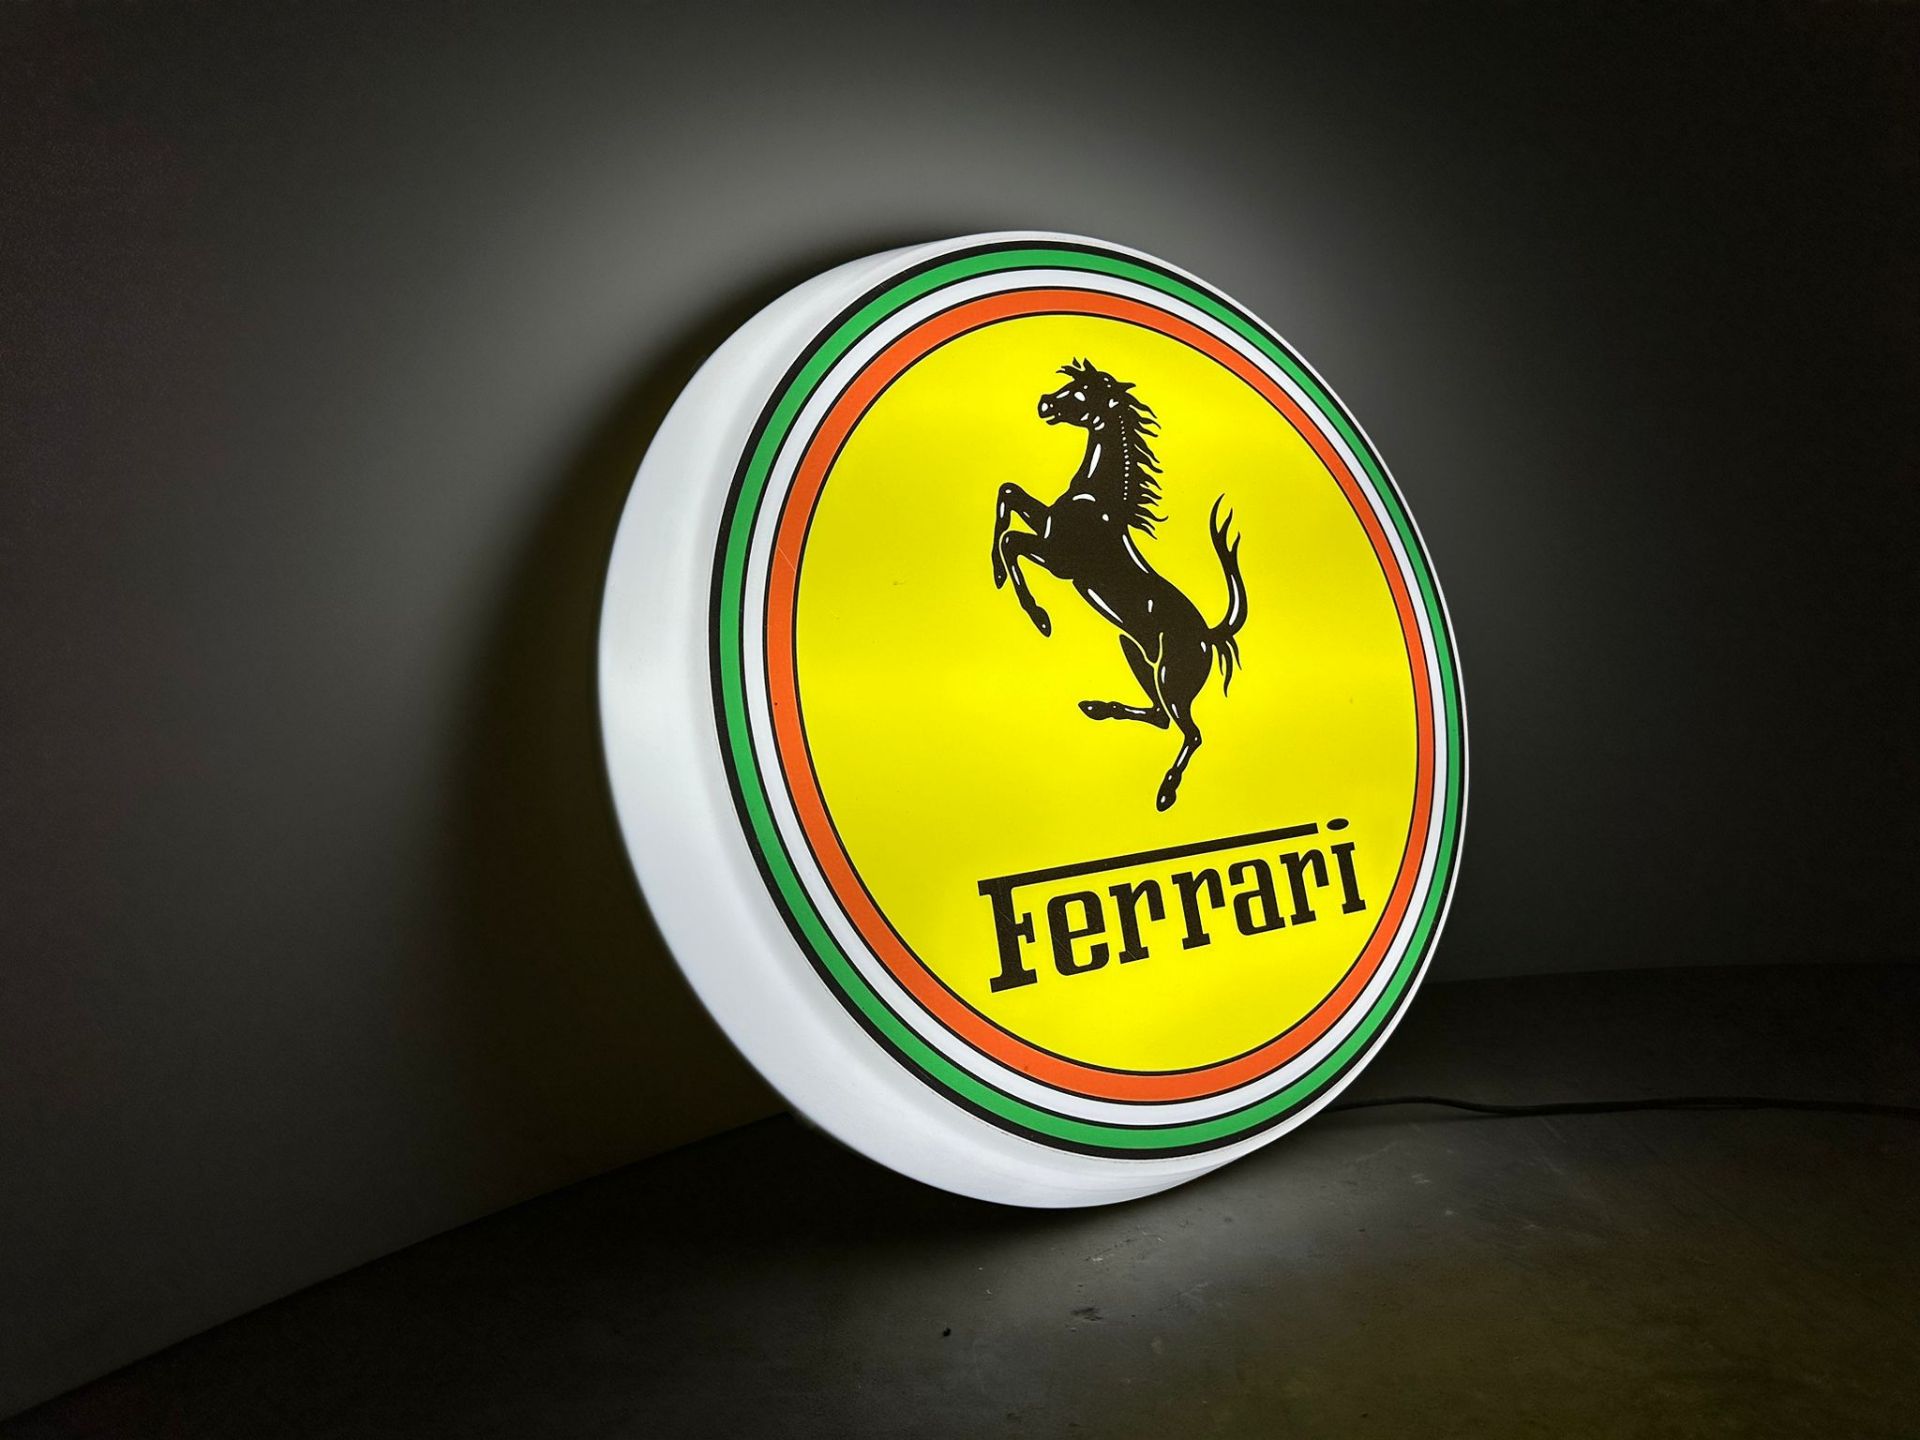 Ferrarivfully working illuminated adapted to any country - Image 5 of 6